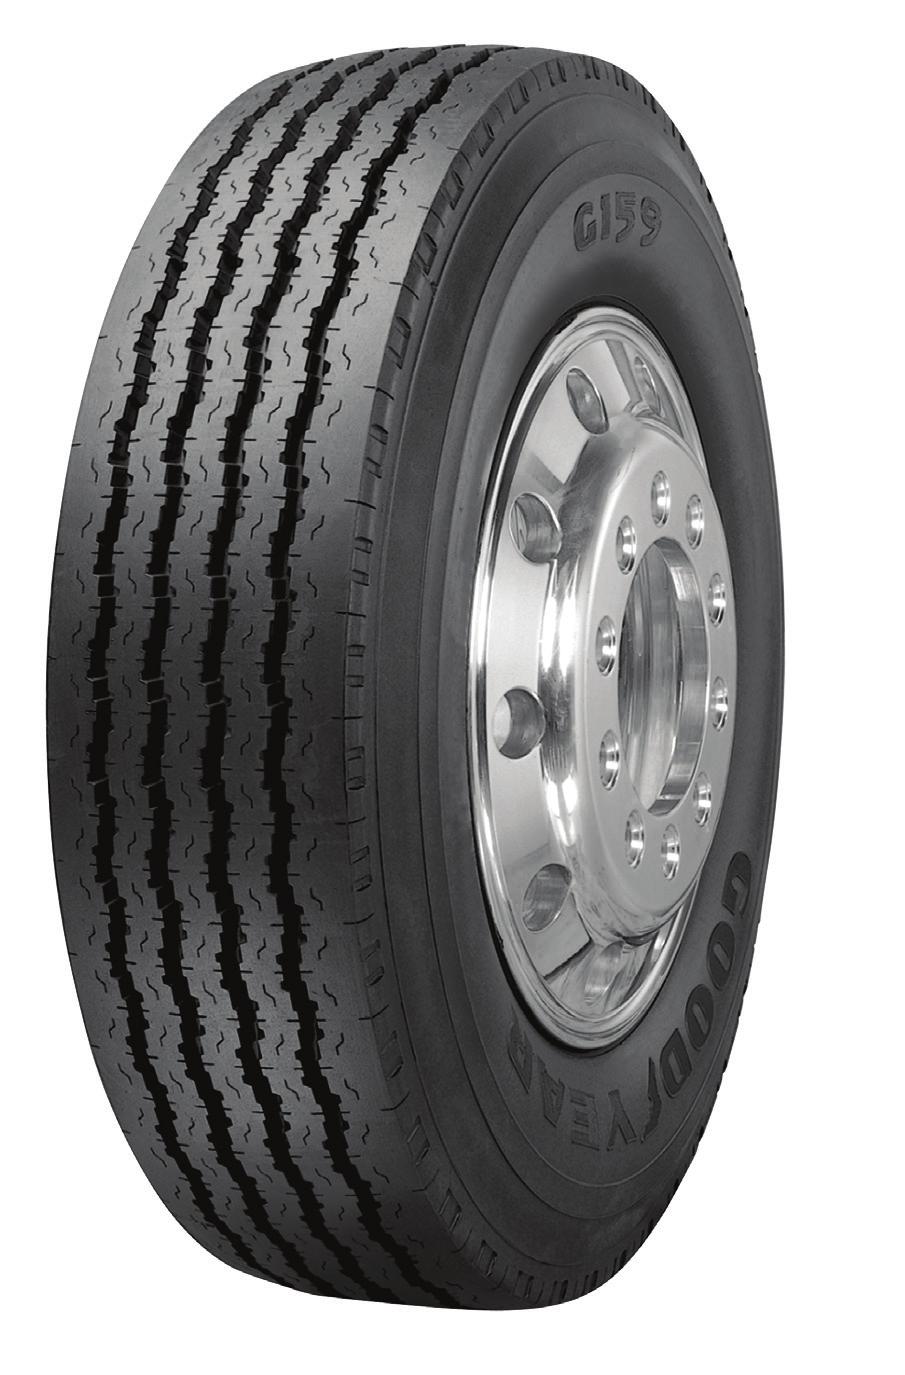 G159 LONG-WEARING RIB TIRE FOR EFFECTIVE LOCAL AND HIGHWAY SERVICE.